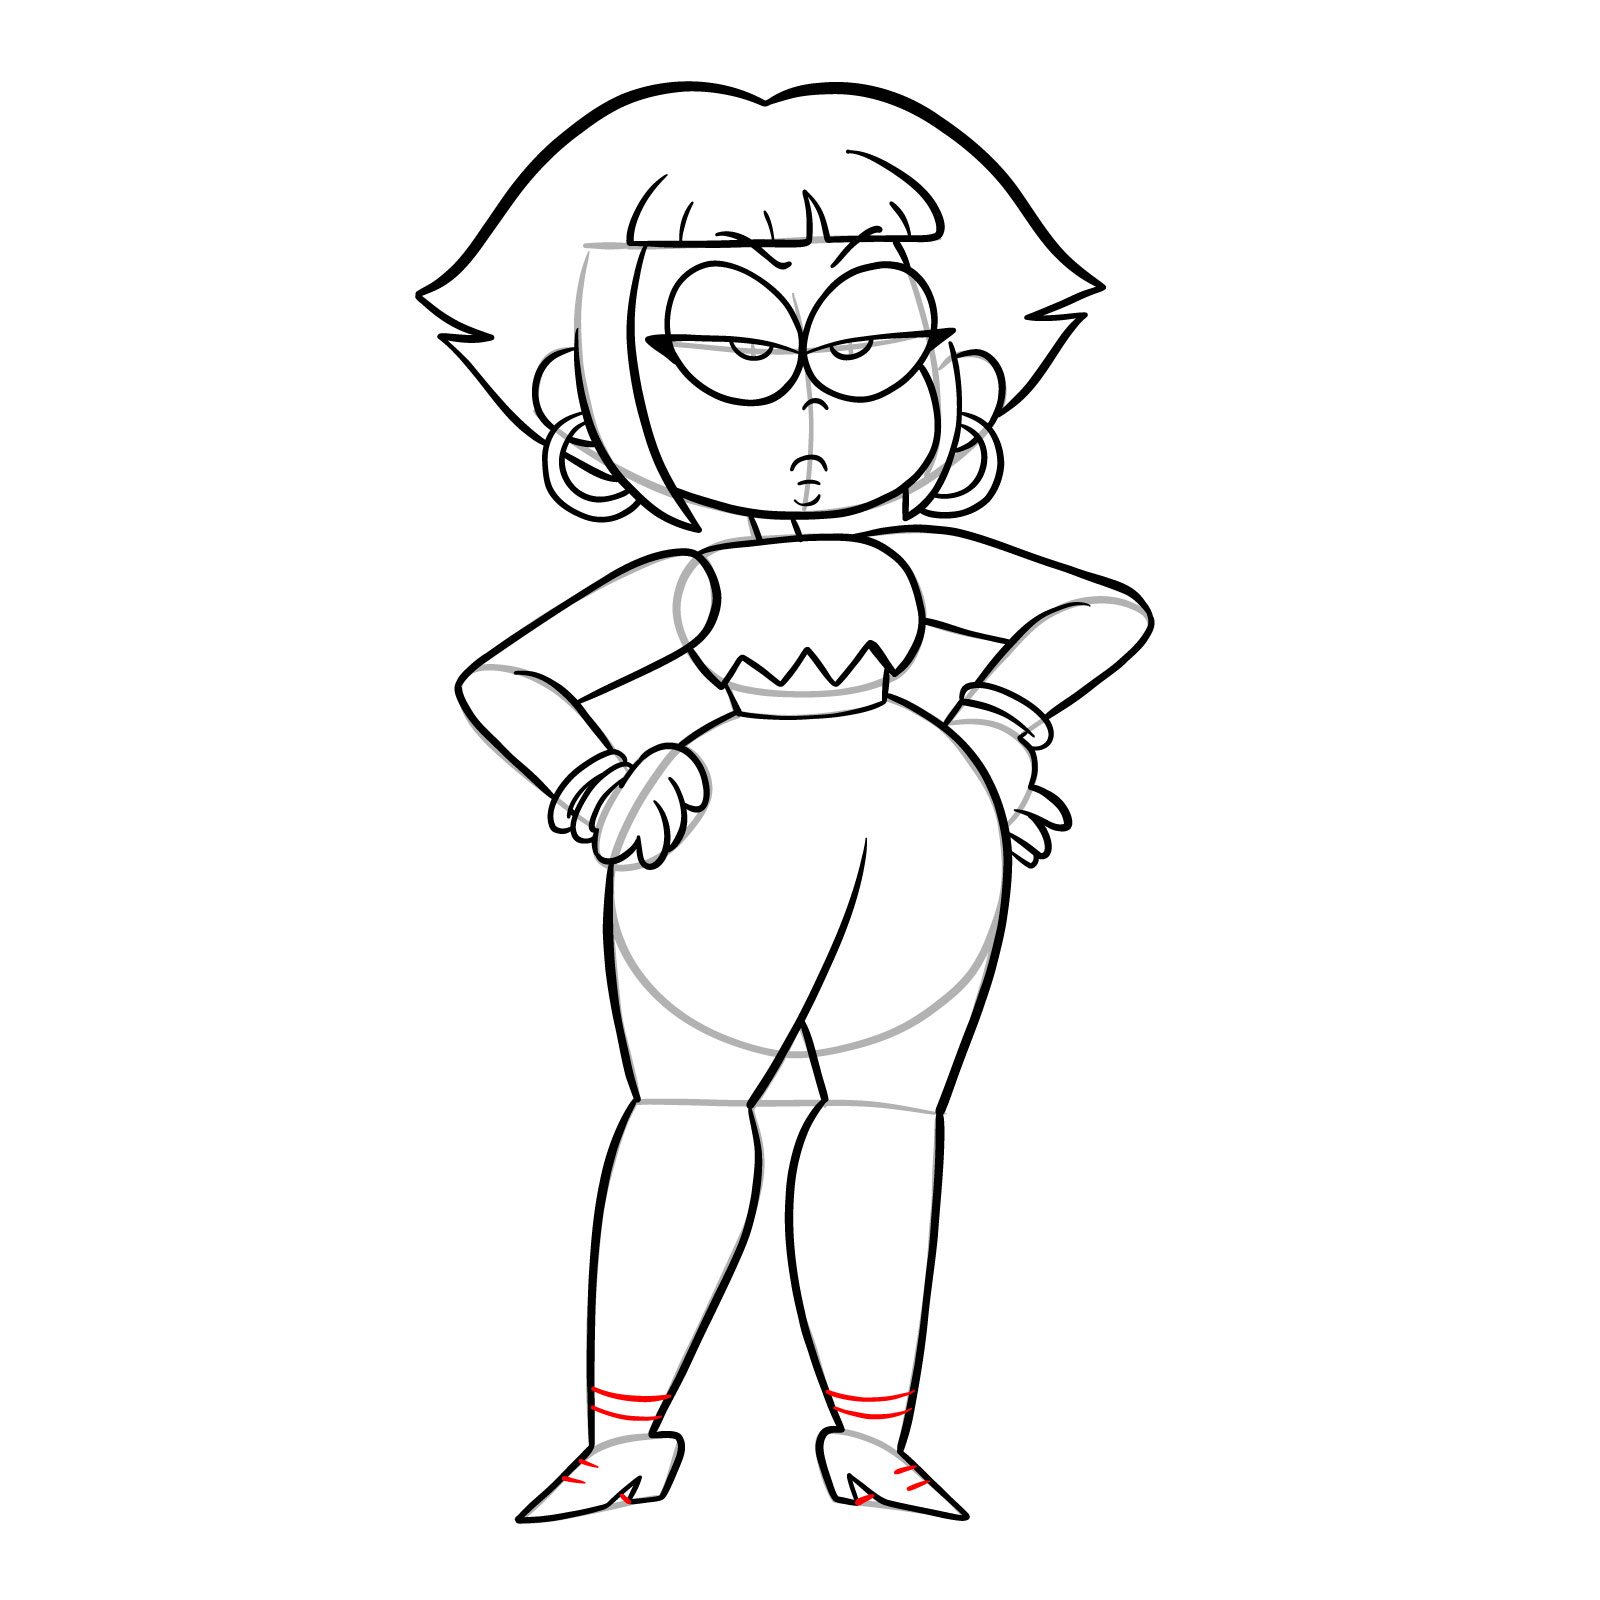 How to draw Human Shannon from OK K.O.! - step 28